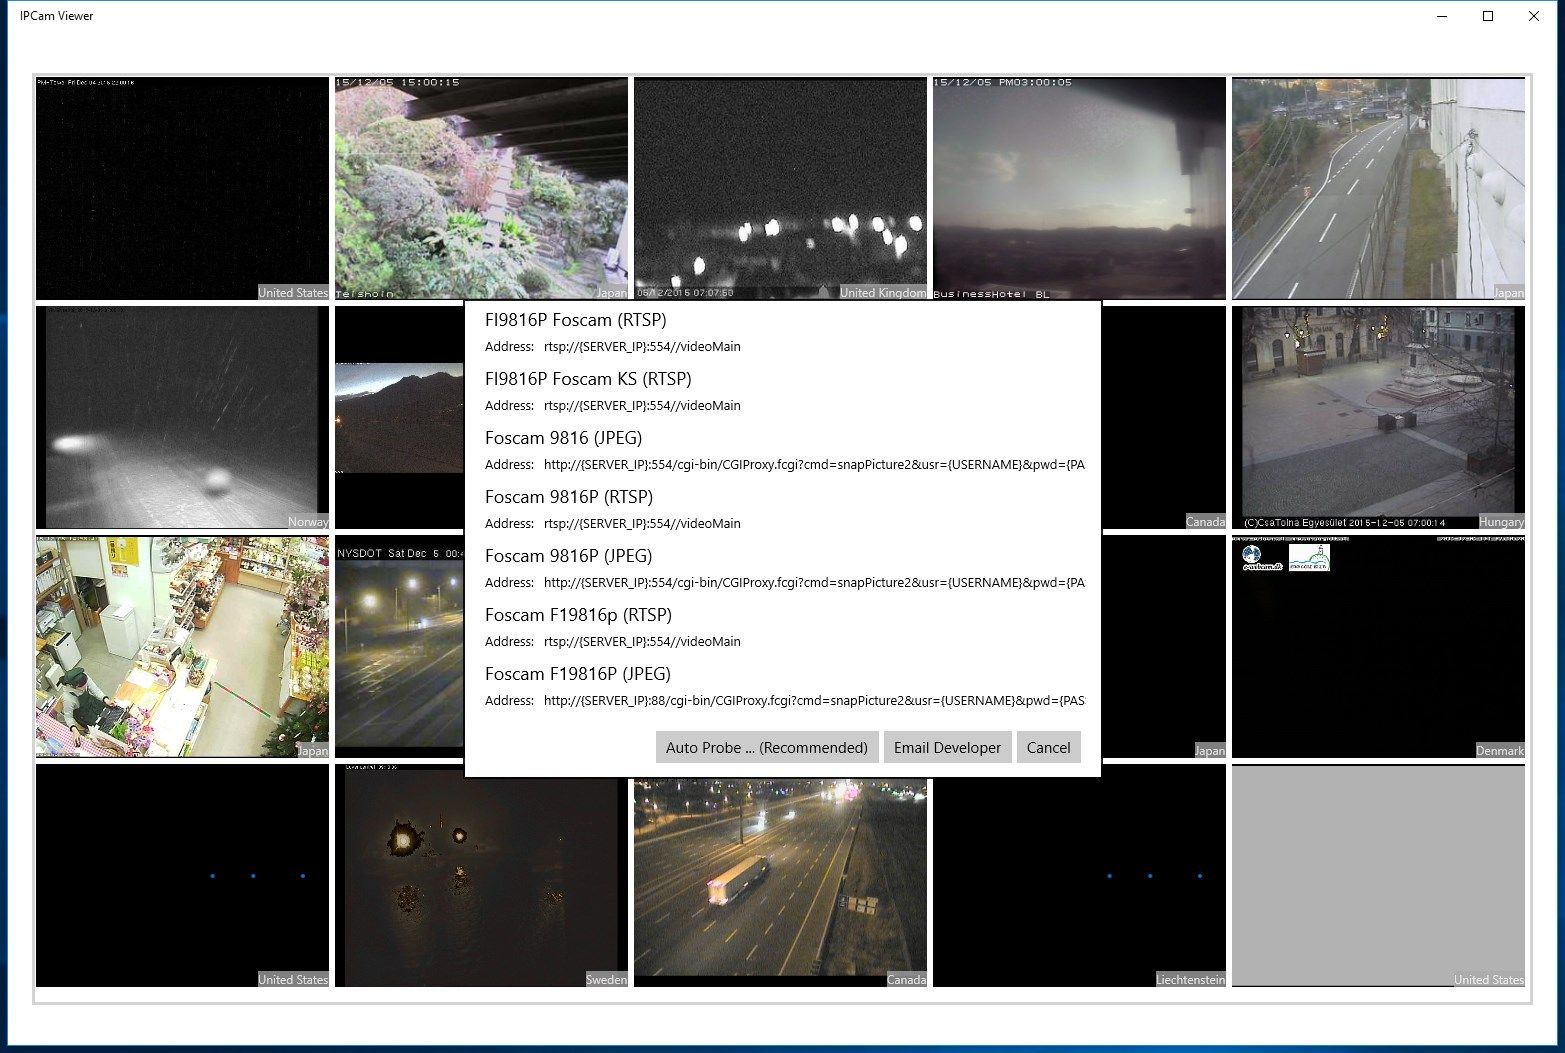 Search your IP camera by make/model.